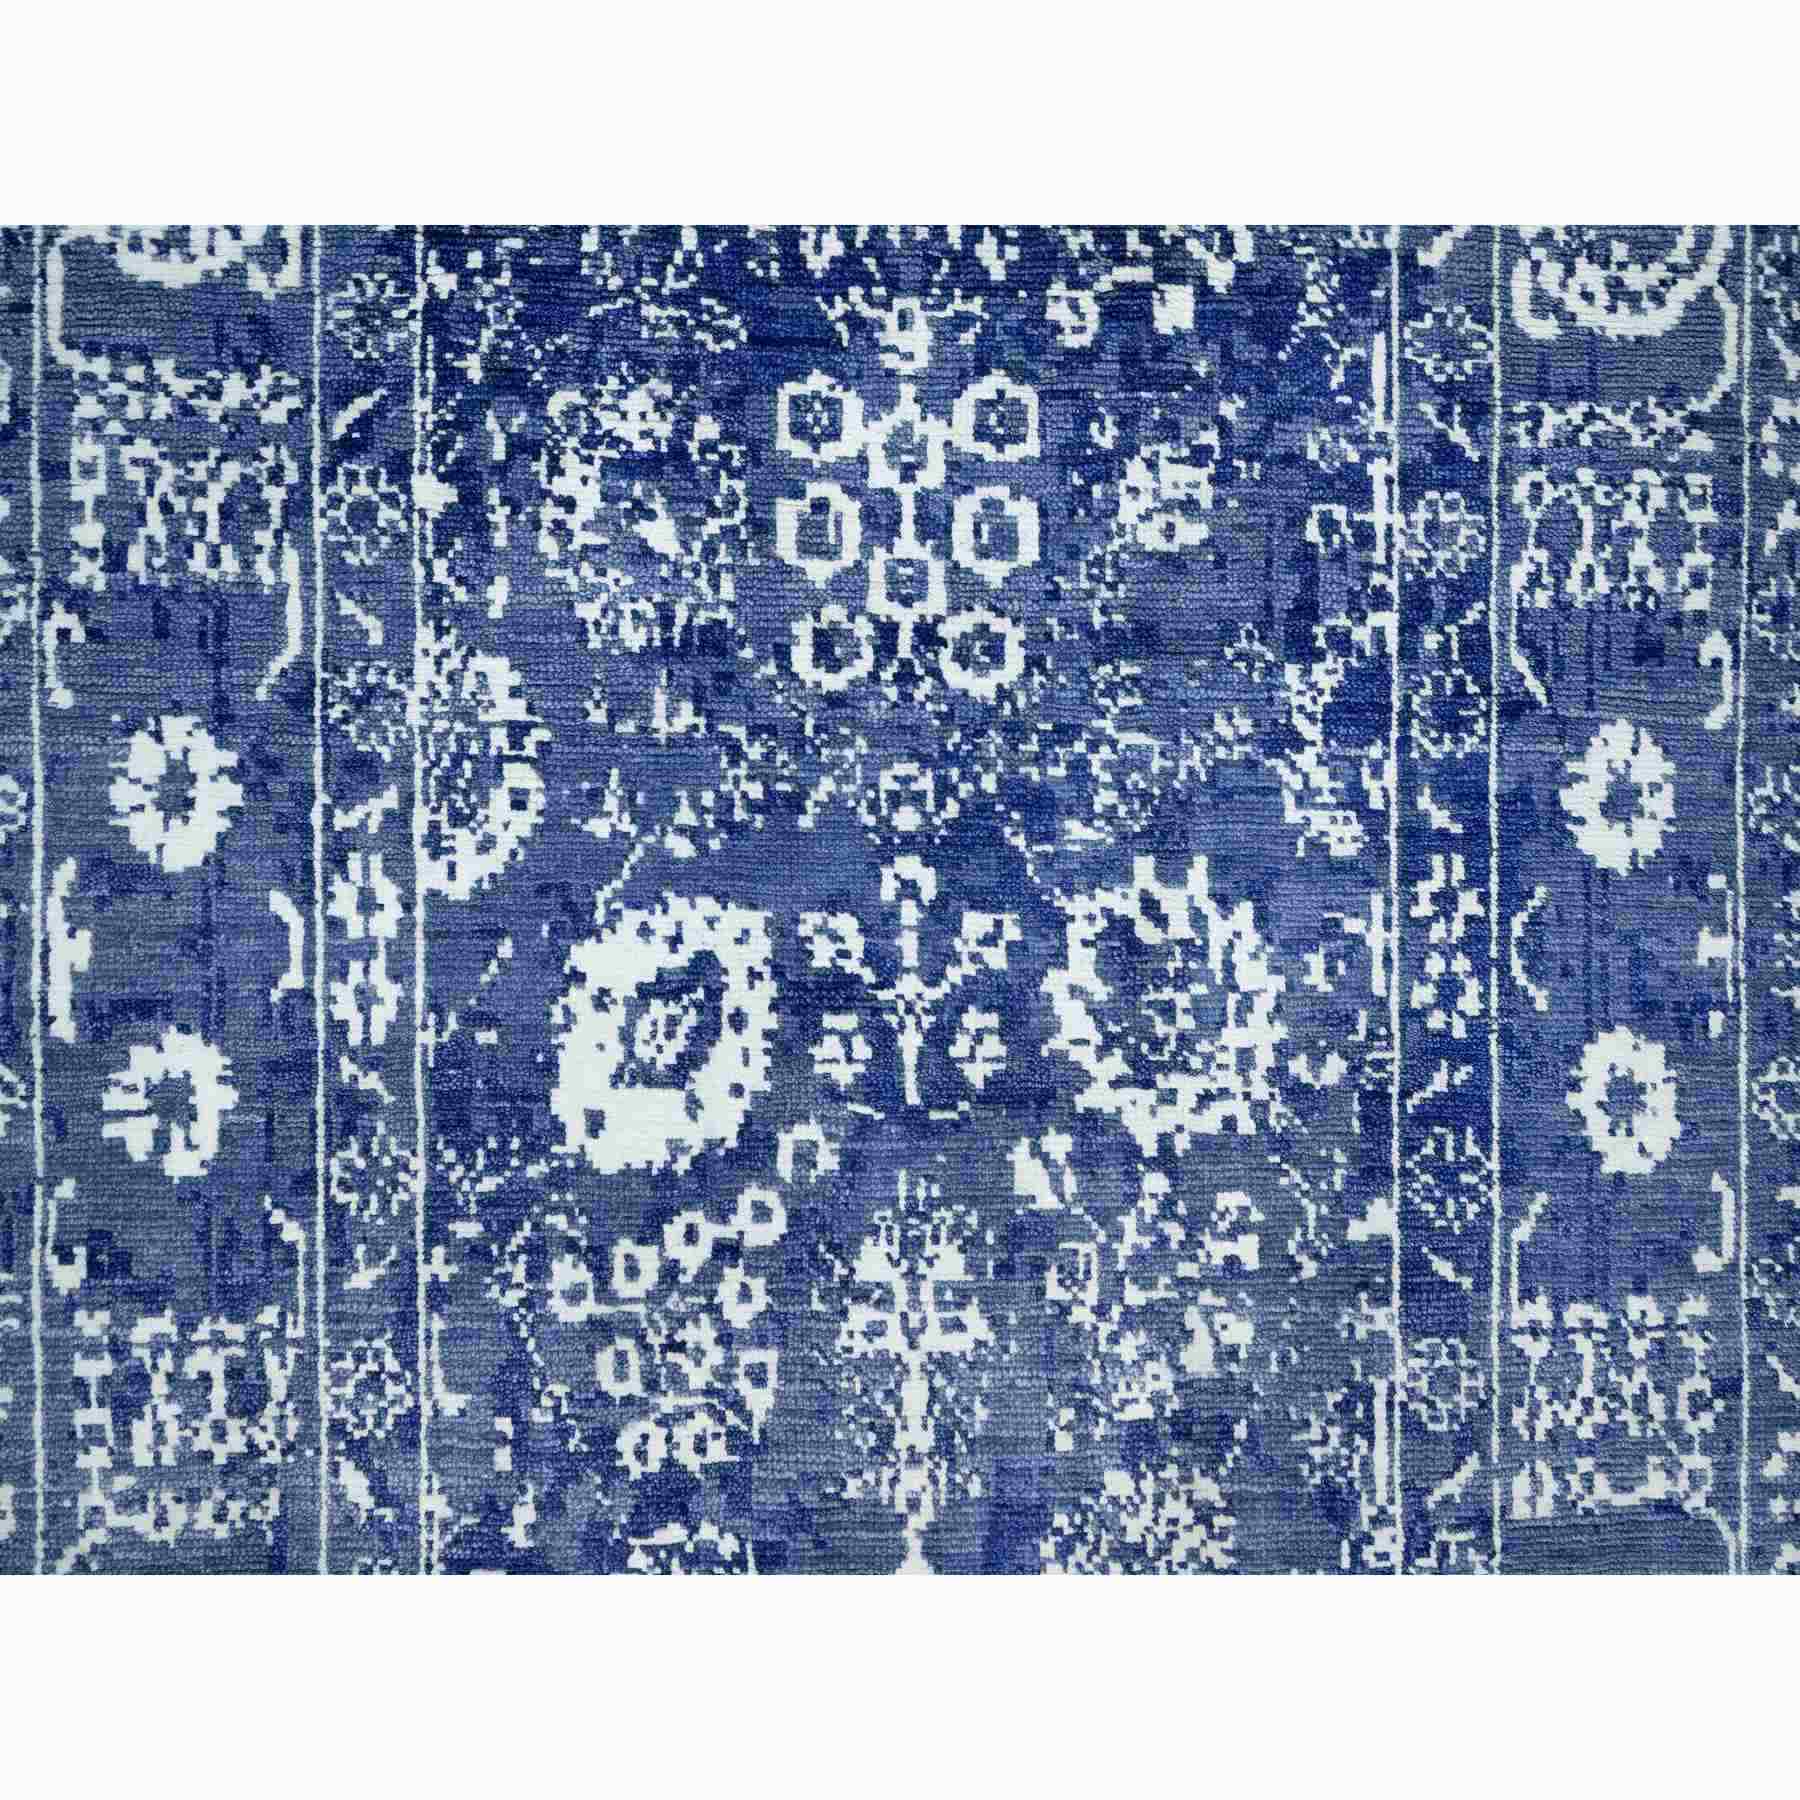 Transitional-Hand-Knotted-Rug-453355